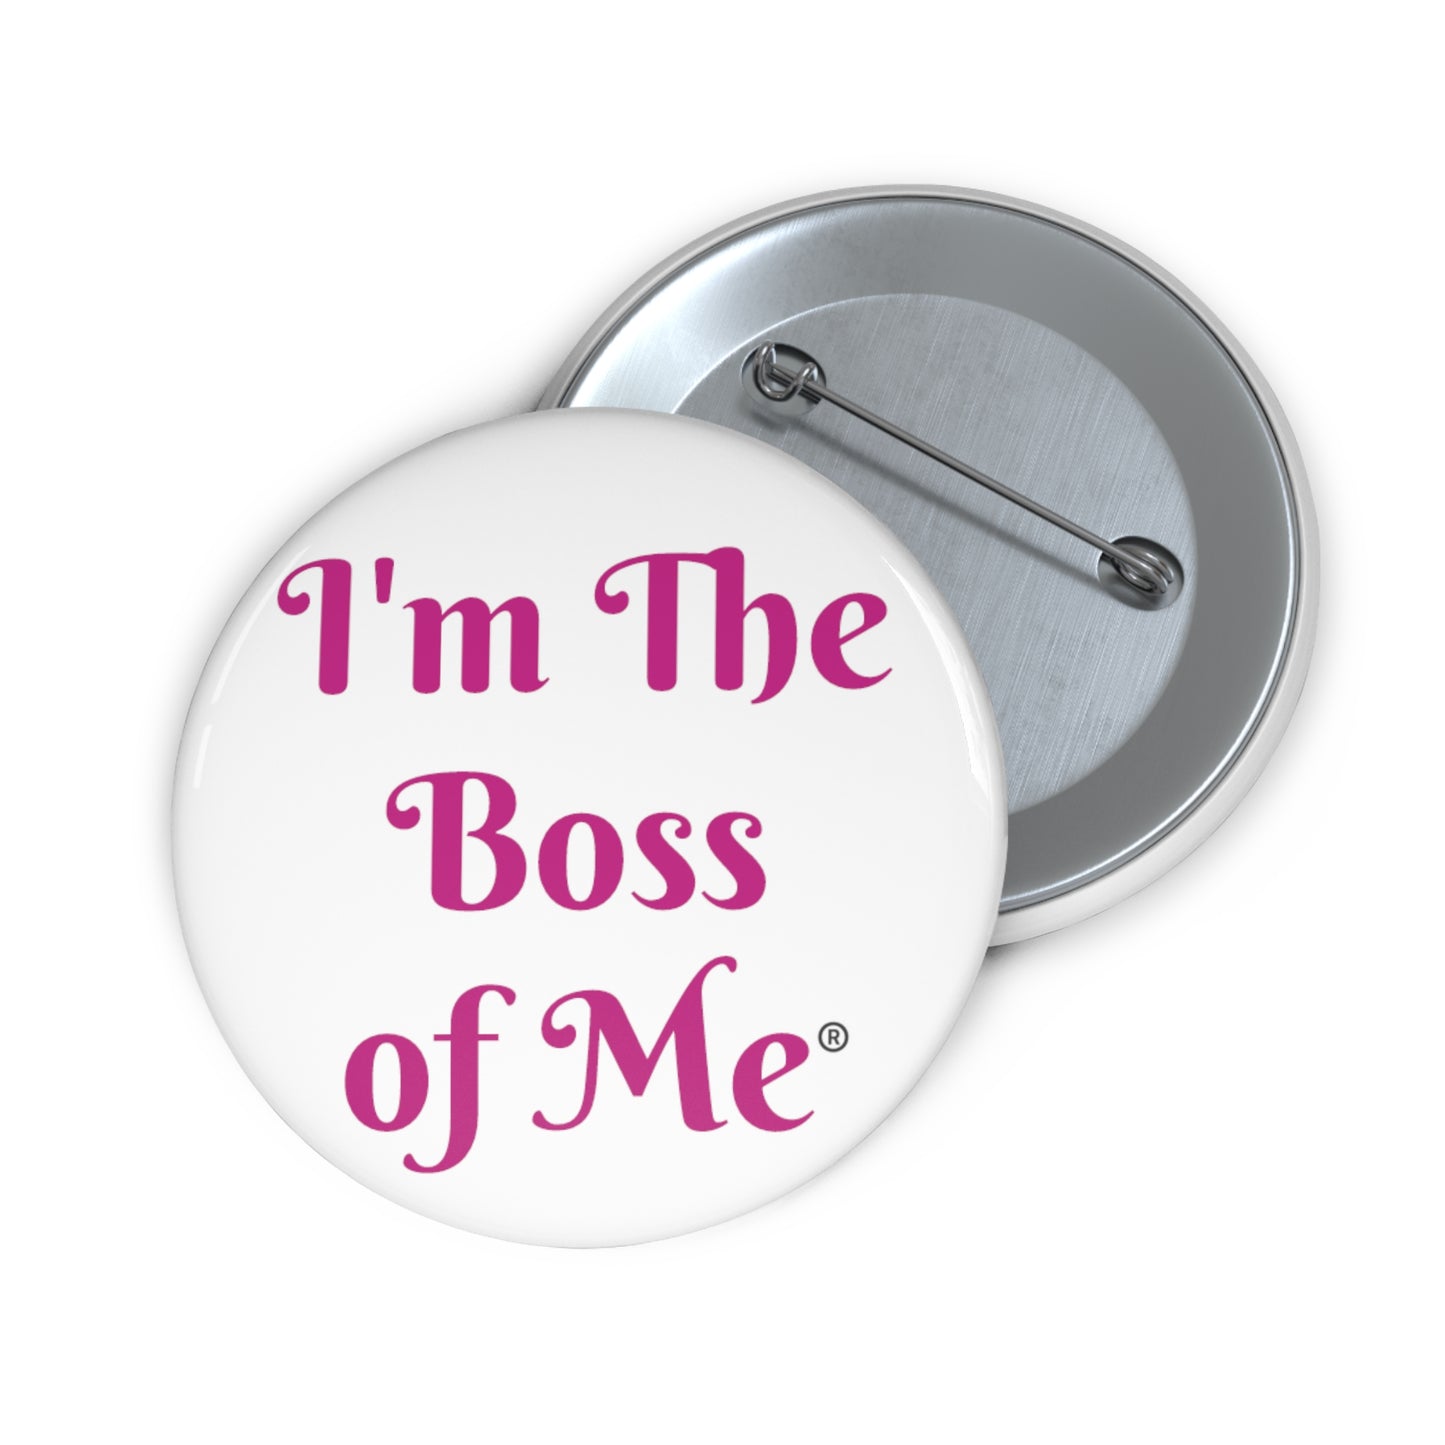 ITBOM ME BOSS Custom Pin Buttons in 3 Sizes